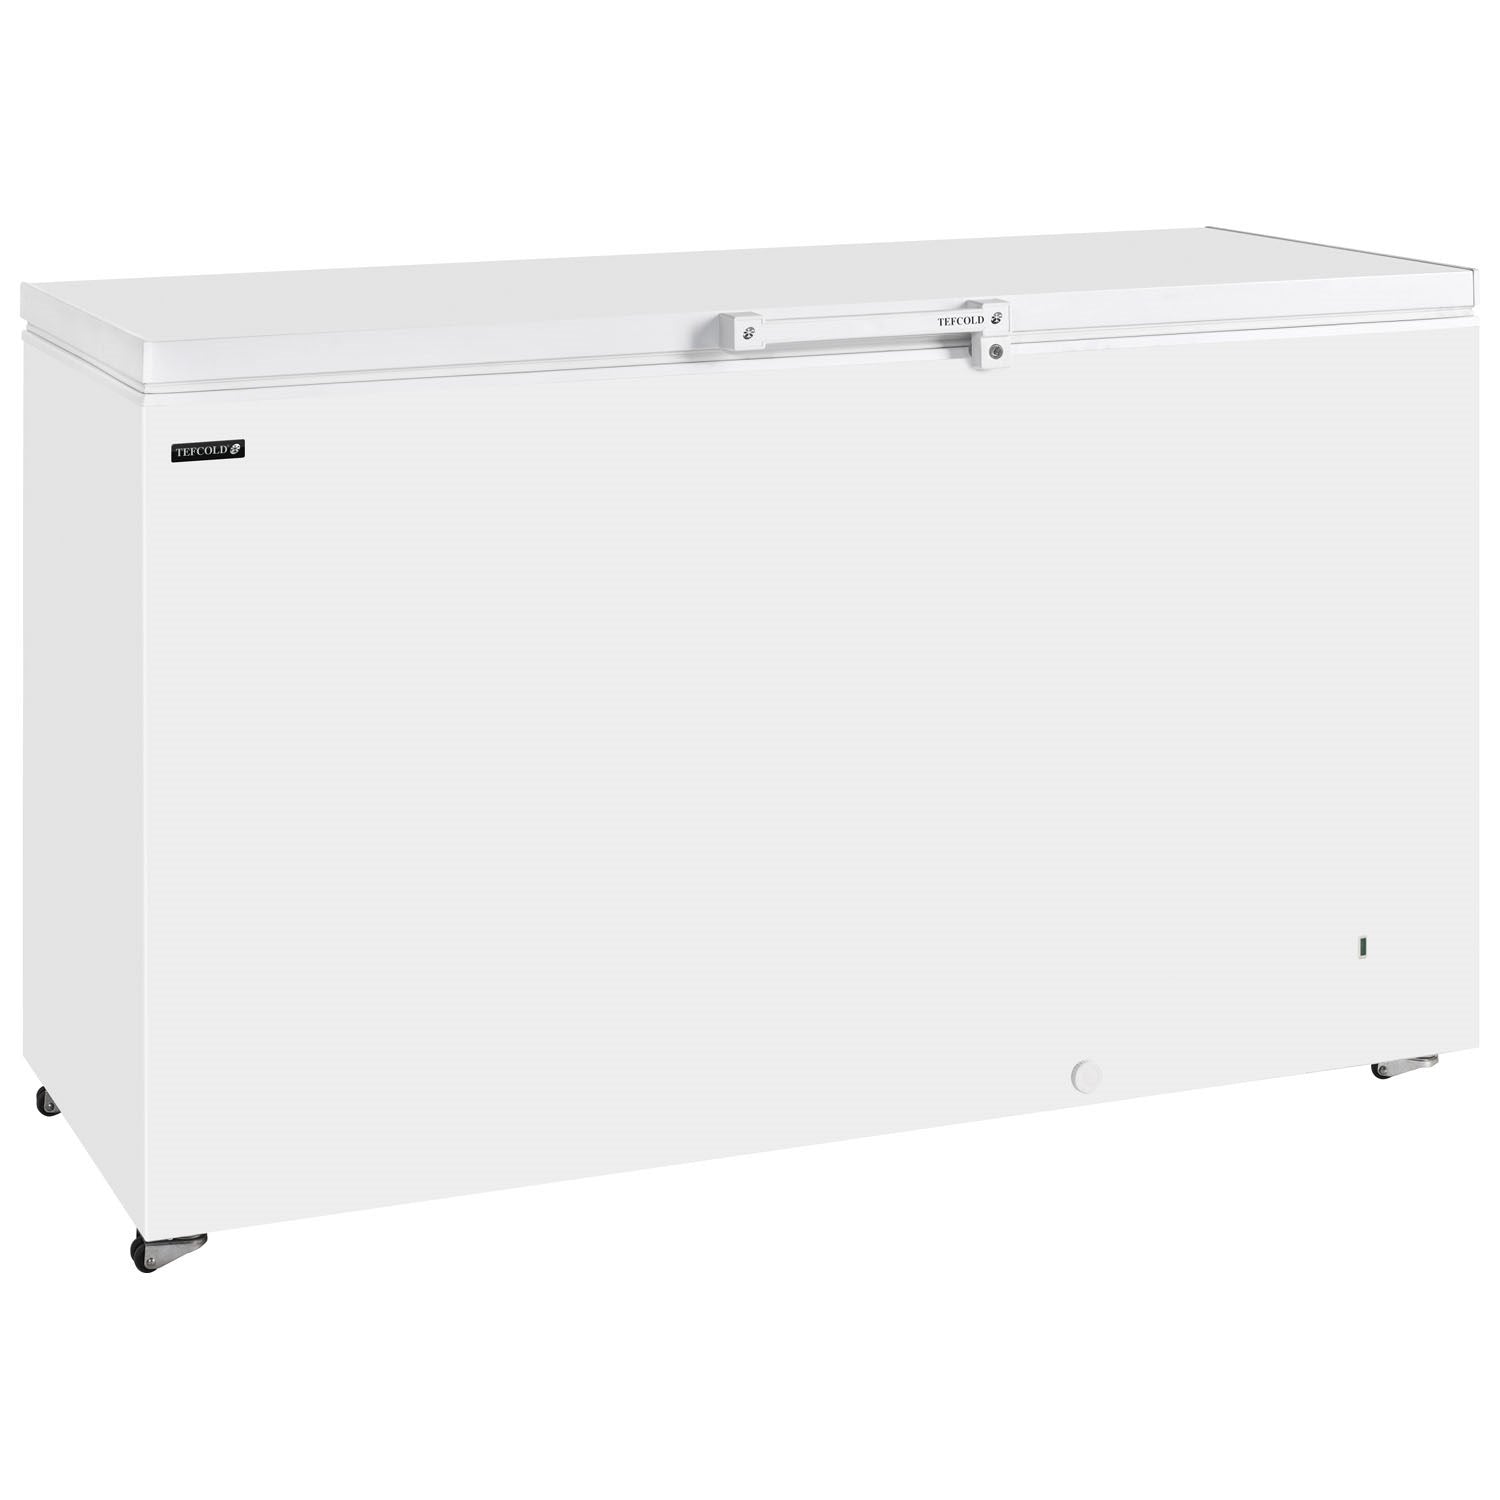 Tefcold GM Range Solid Lid Chest Freezer.Product Ref:00483.MODEL:GM500..🚚 4-6 days Delivery